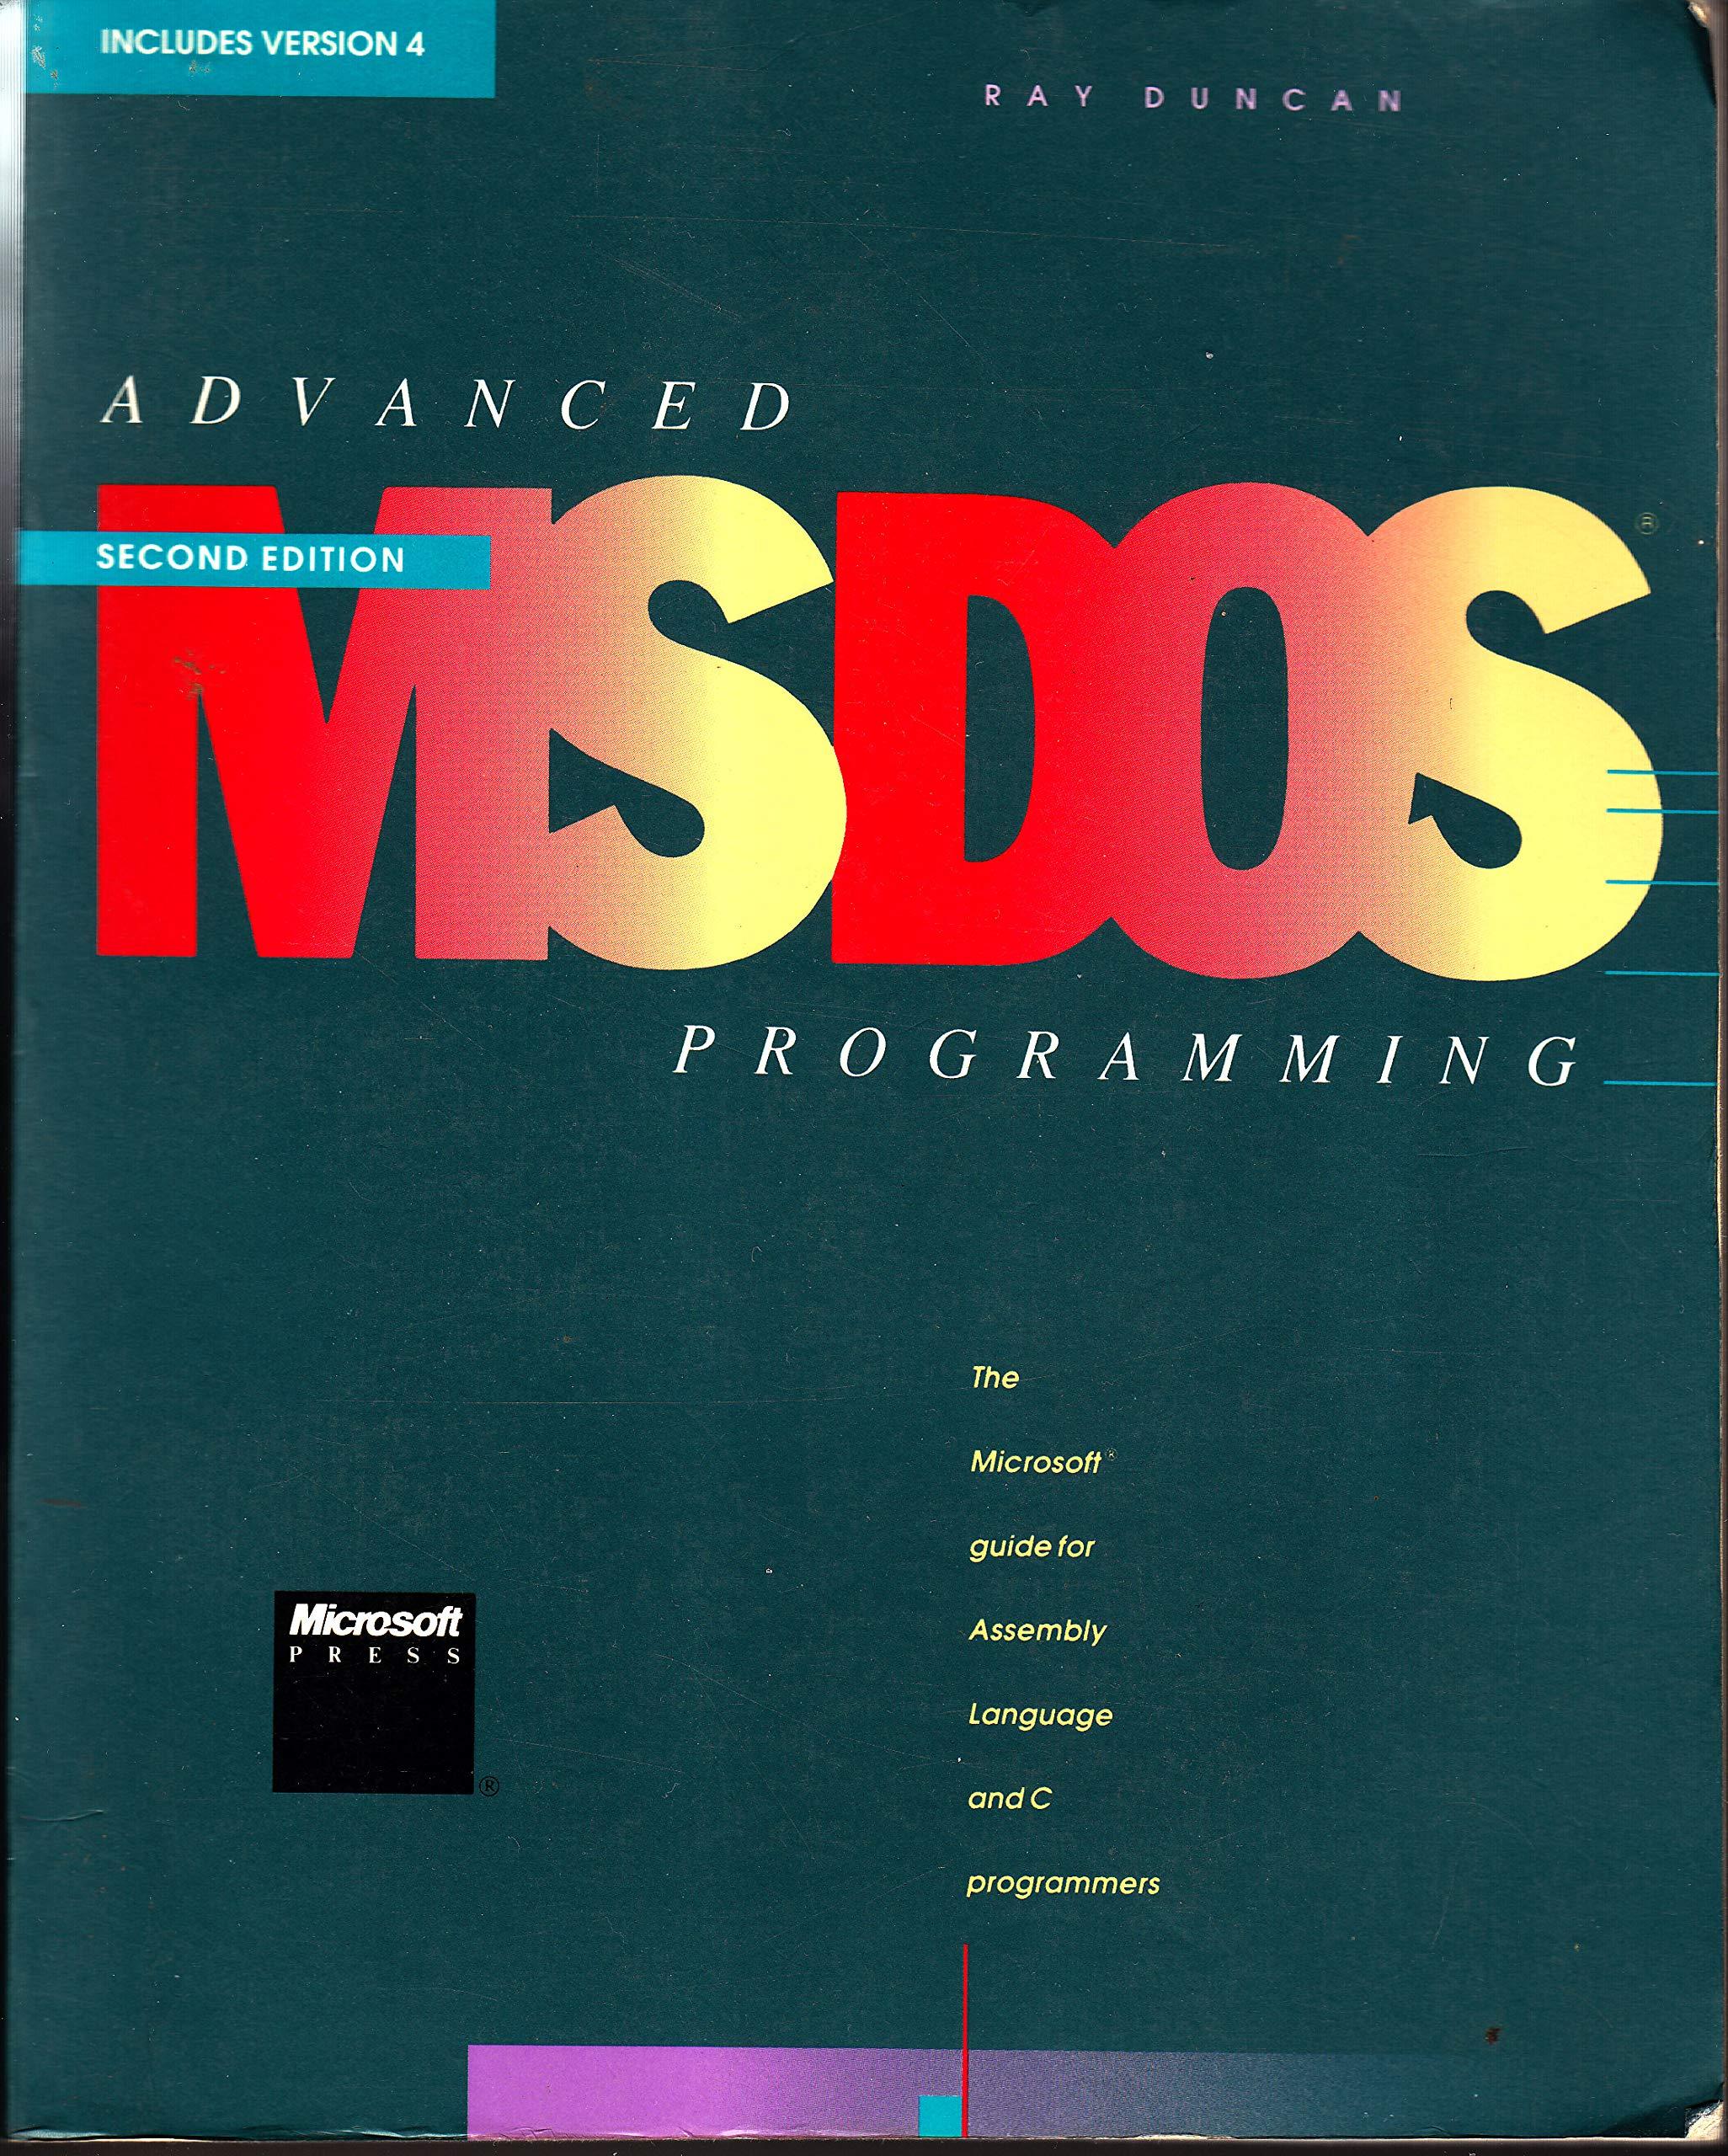 advanced ms dos programming the microsoft guide for assembly language and c programmers 1st edition ray